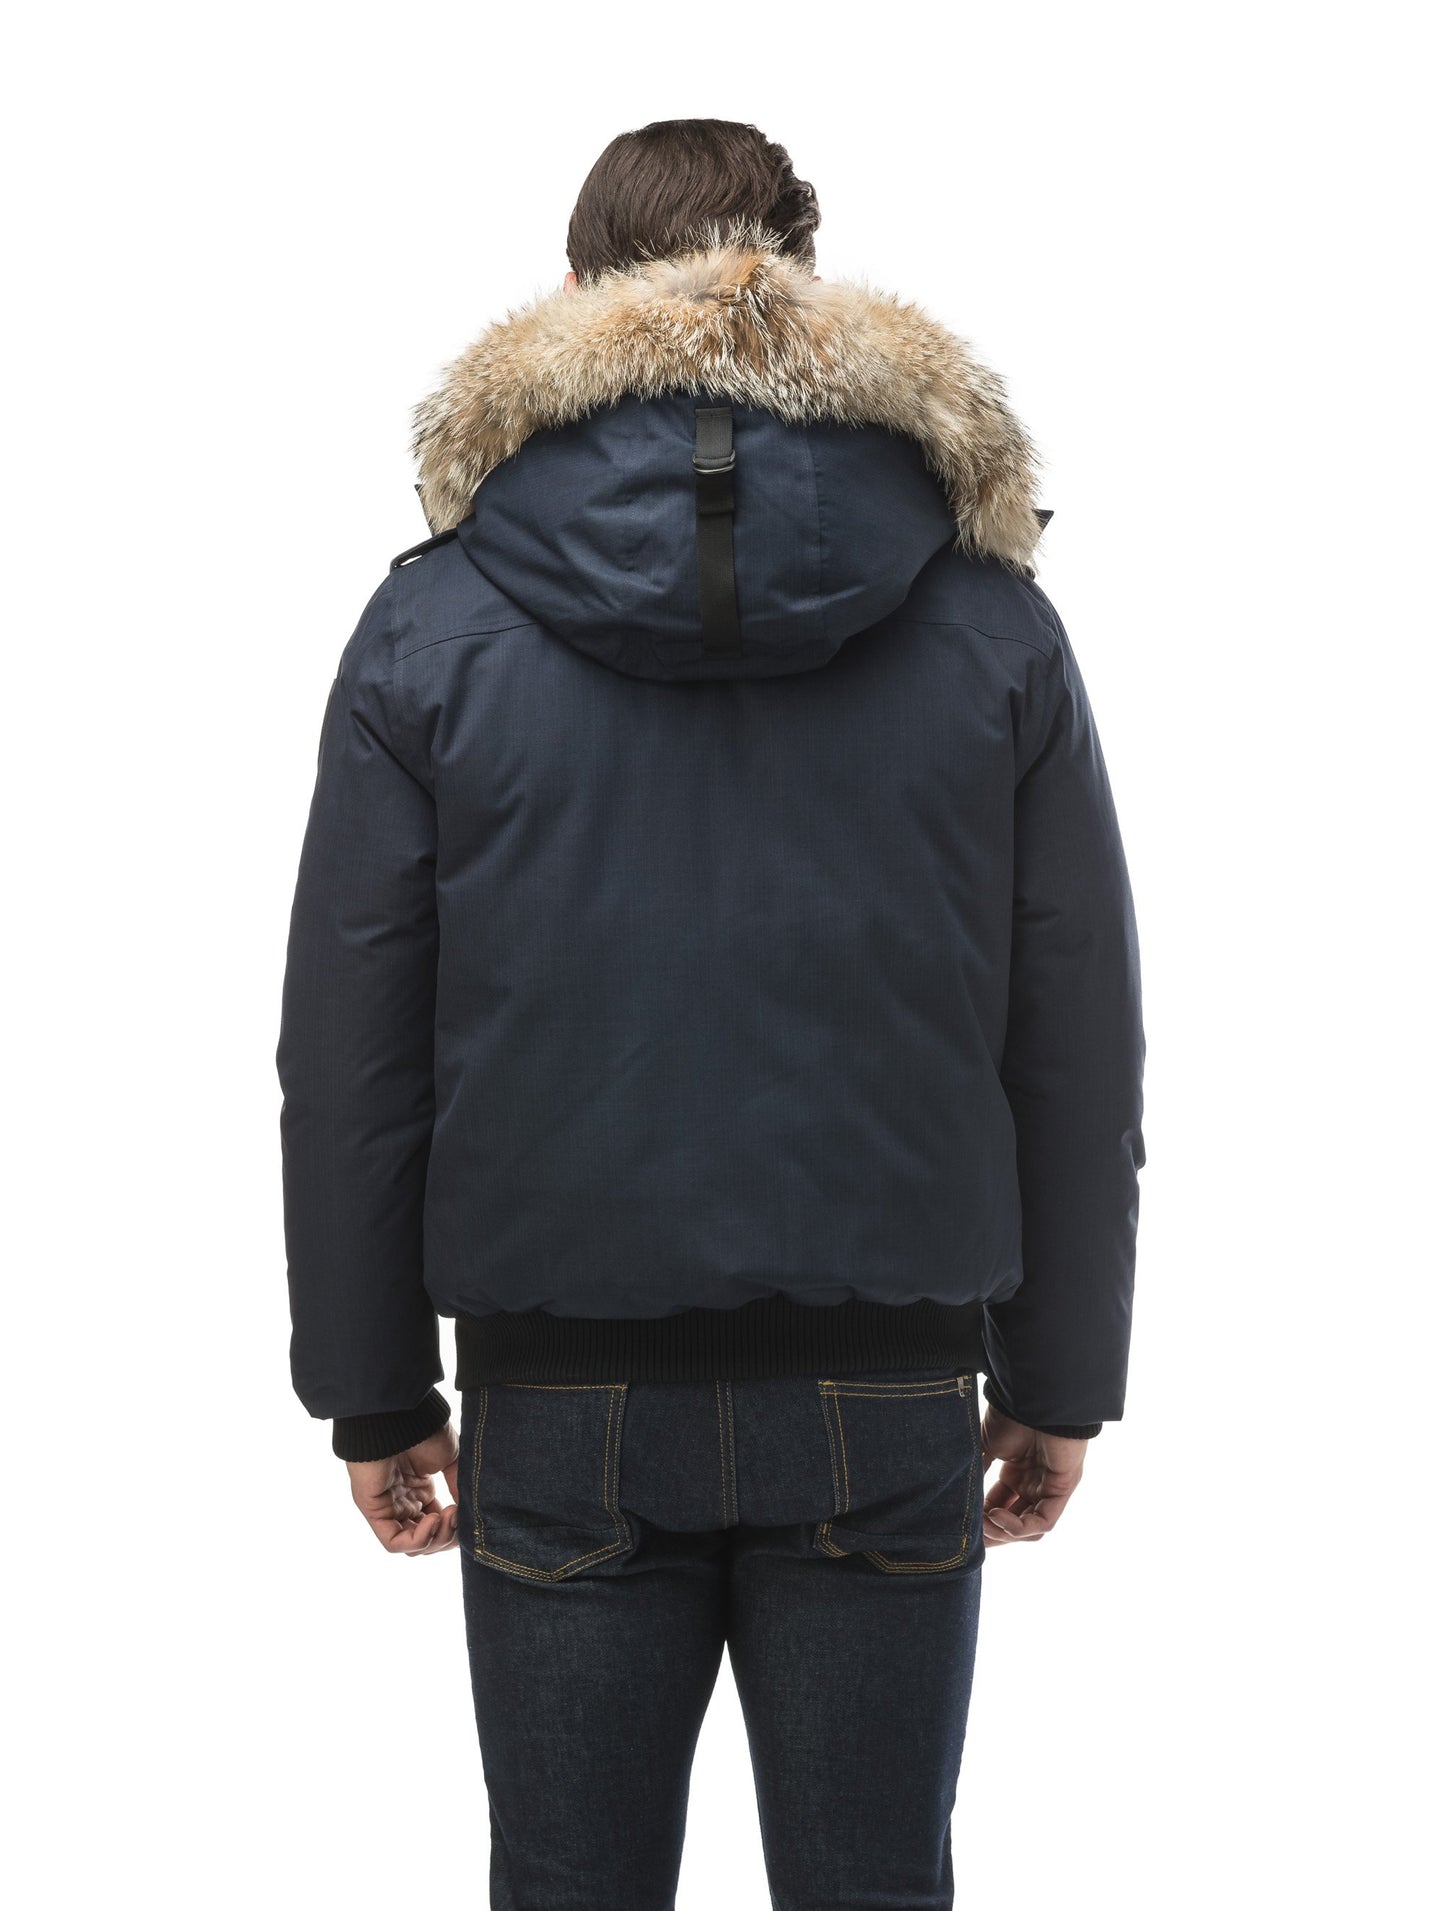 Men's down filled bomber that sits just above the hips with a completely removable hood that's windproof, waterproof, and breathable in CH Navy